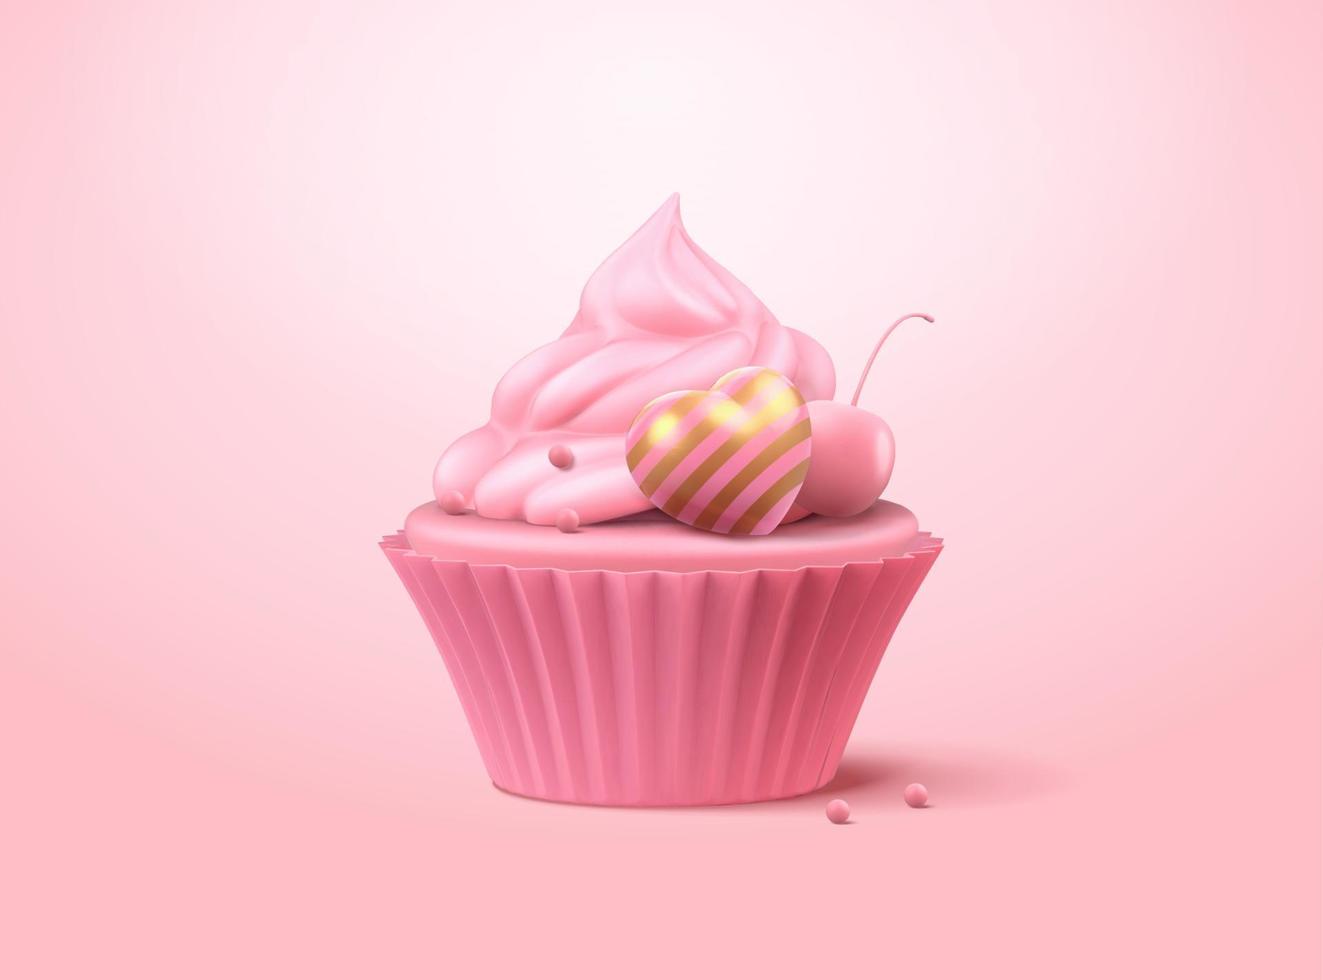 3d illustration of sweet pink cup cake with whipped cream and cherry. Dessert element isolated on pink background. vector